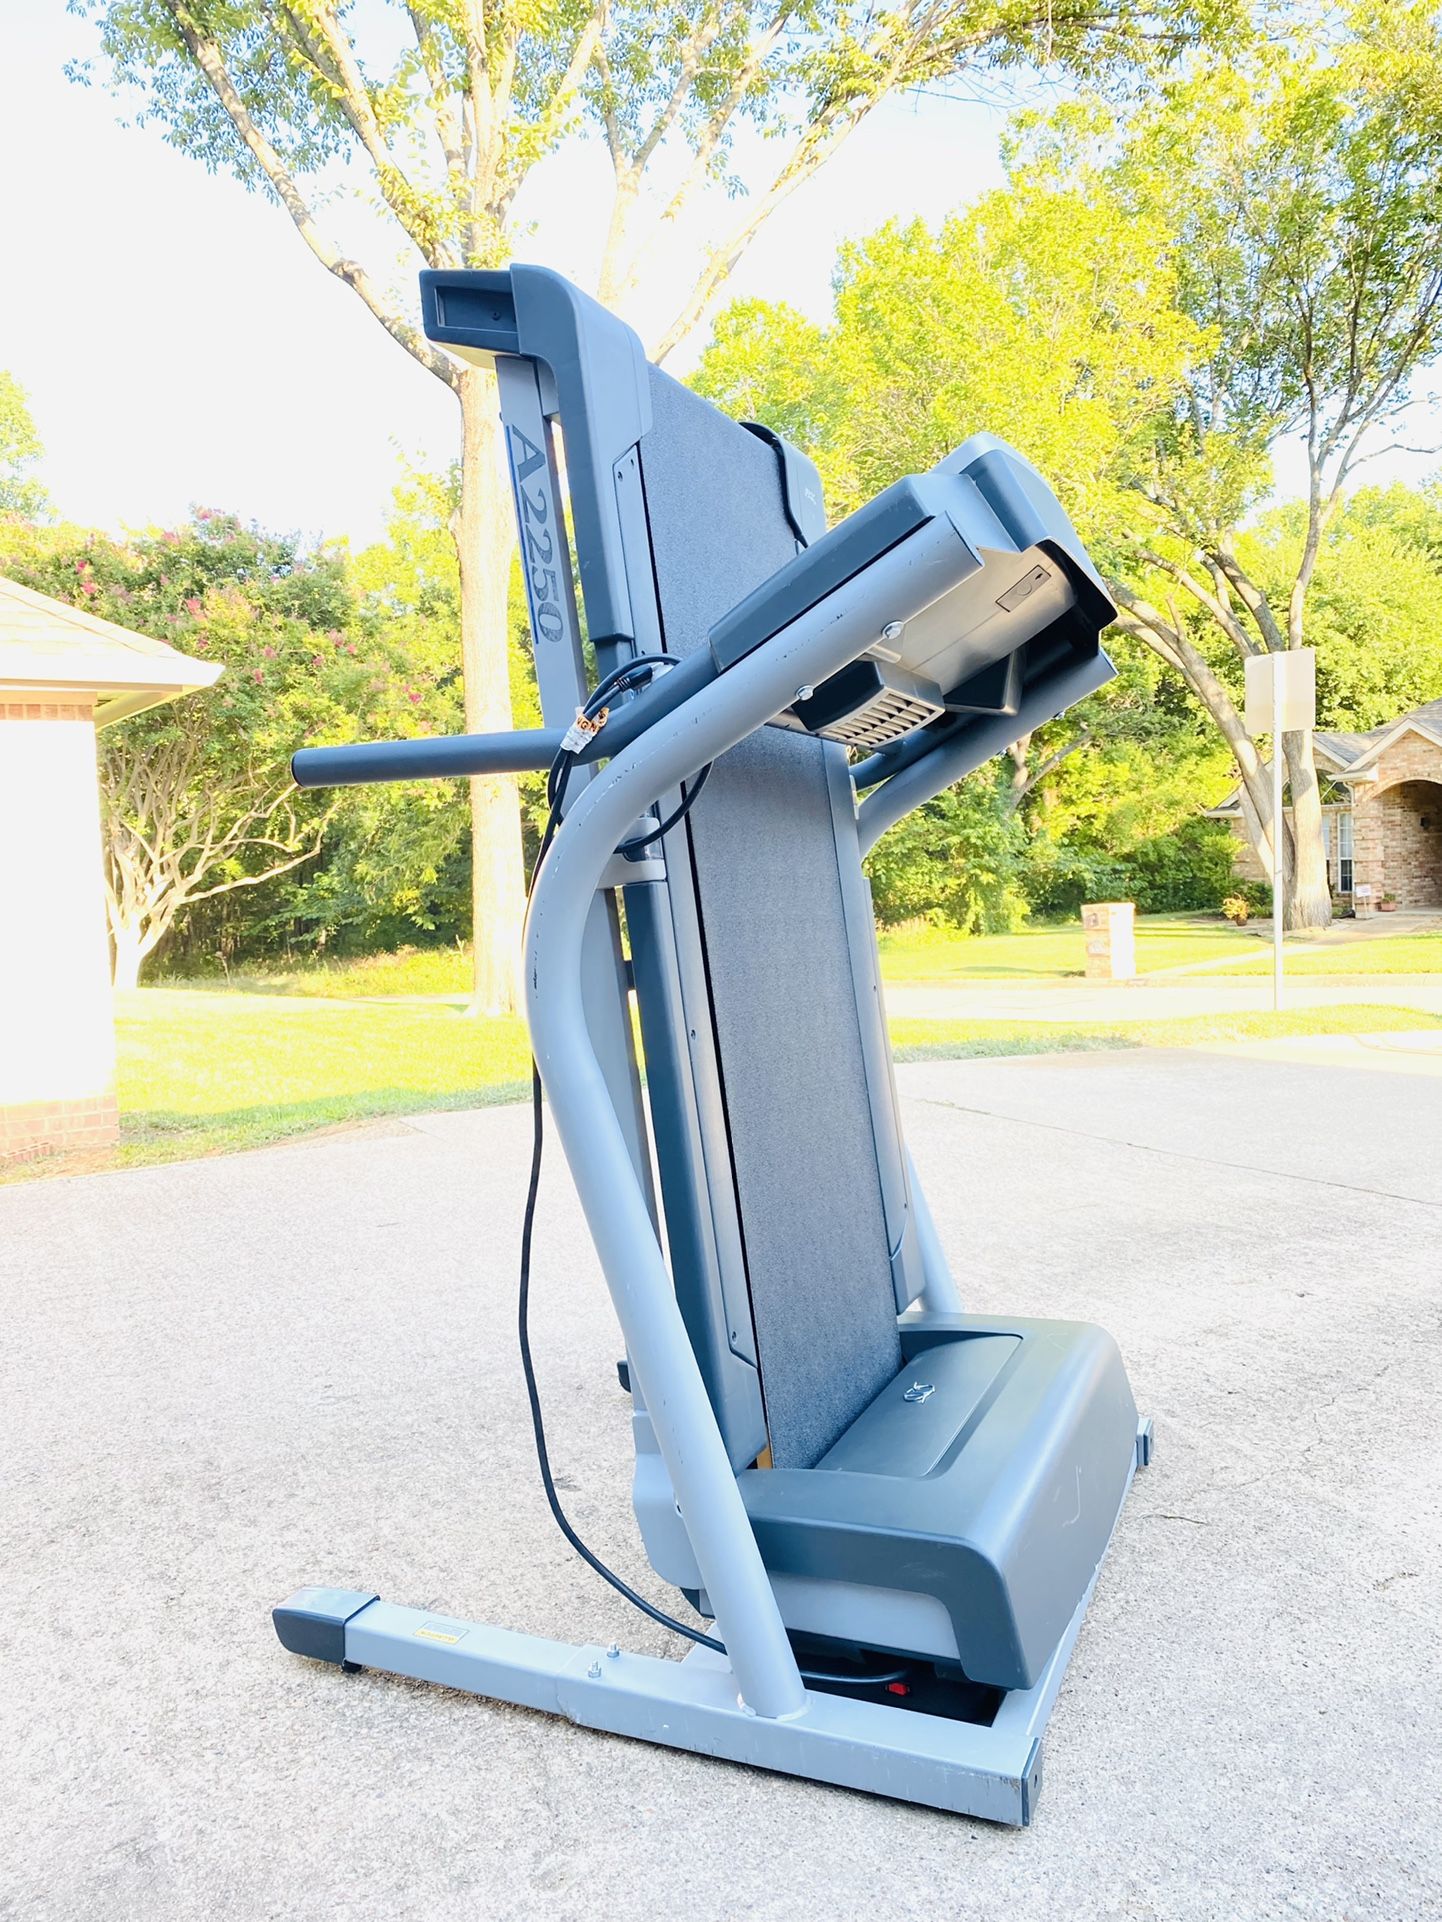 Nordictrack A2250 Treadmill With Power Incline 